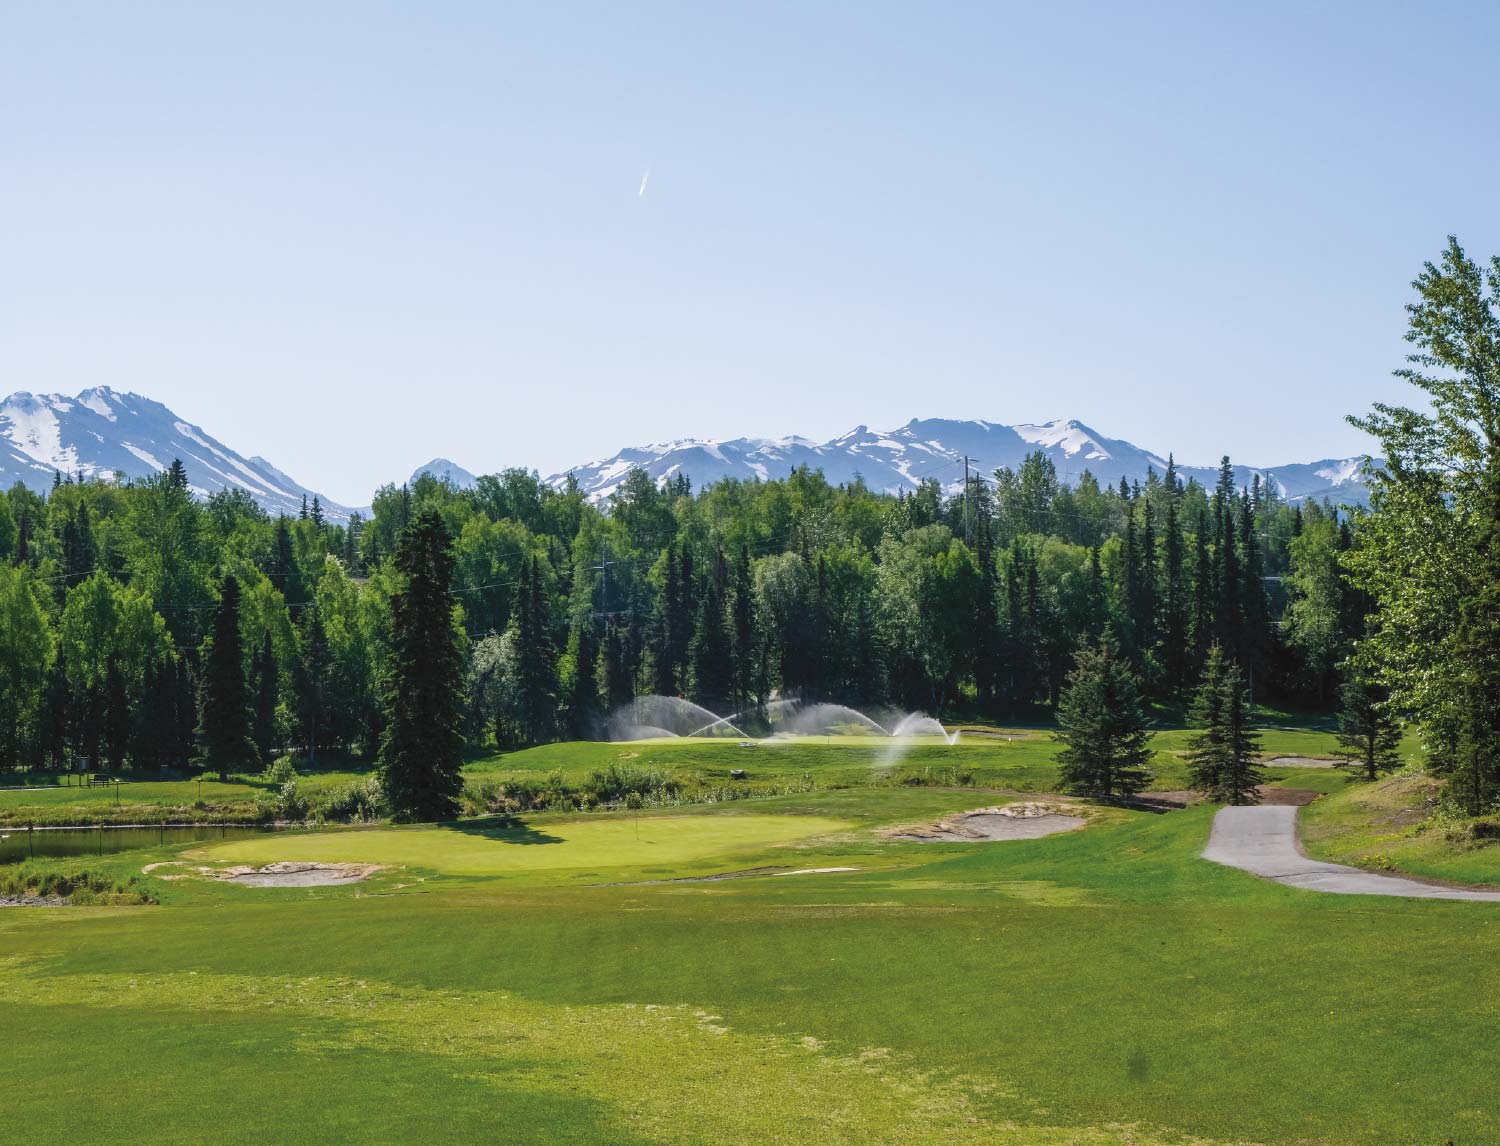 Built thirty-five years ago, Anchorage Golf Course